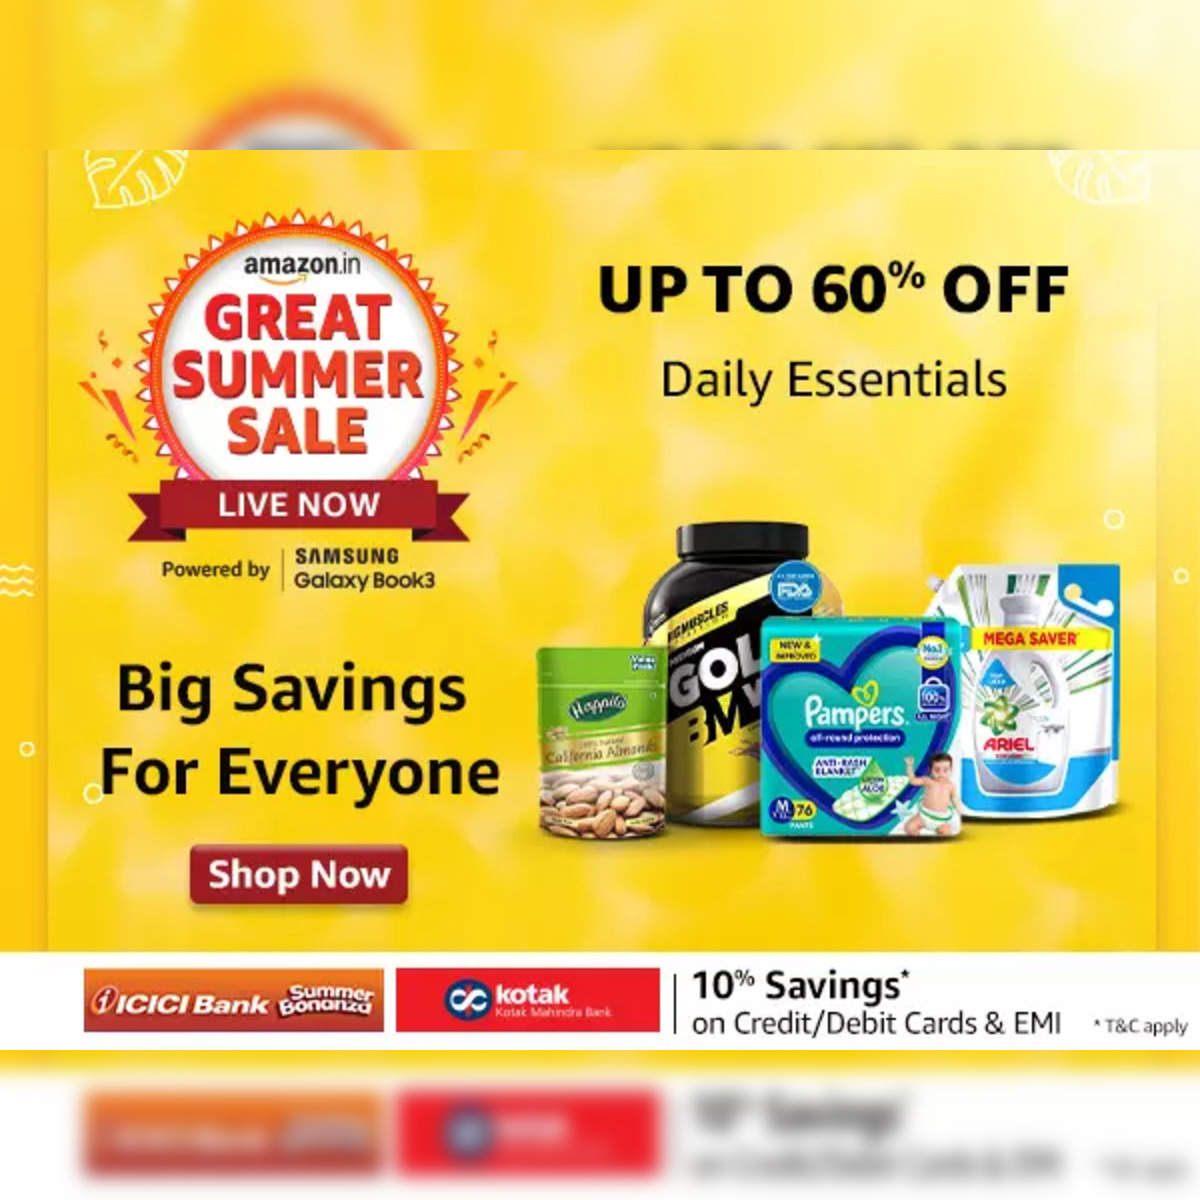 Sale today: Up to 60% off on Daily Essentials - The